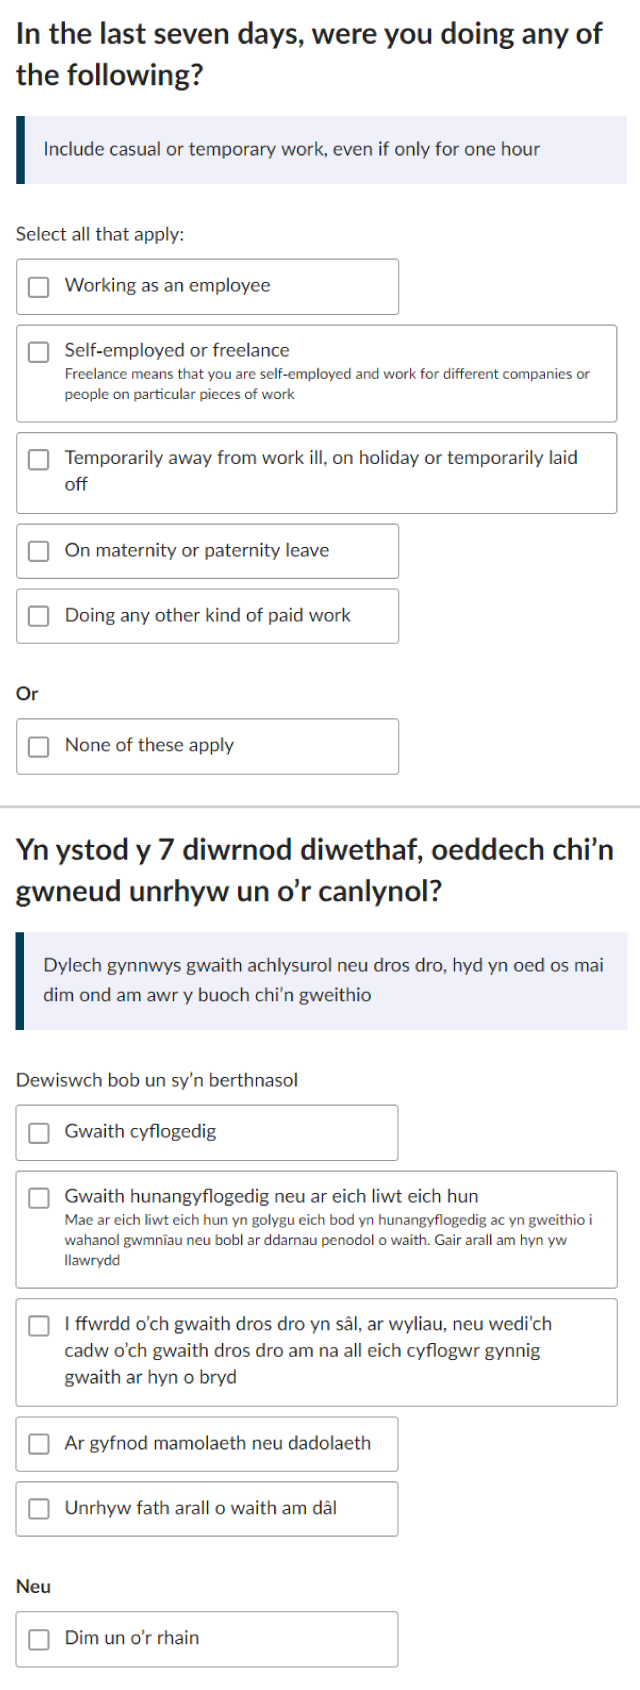 Online question on employment activity last week in English and Welsh.